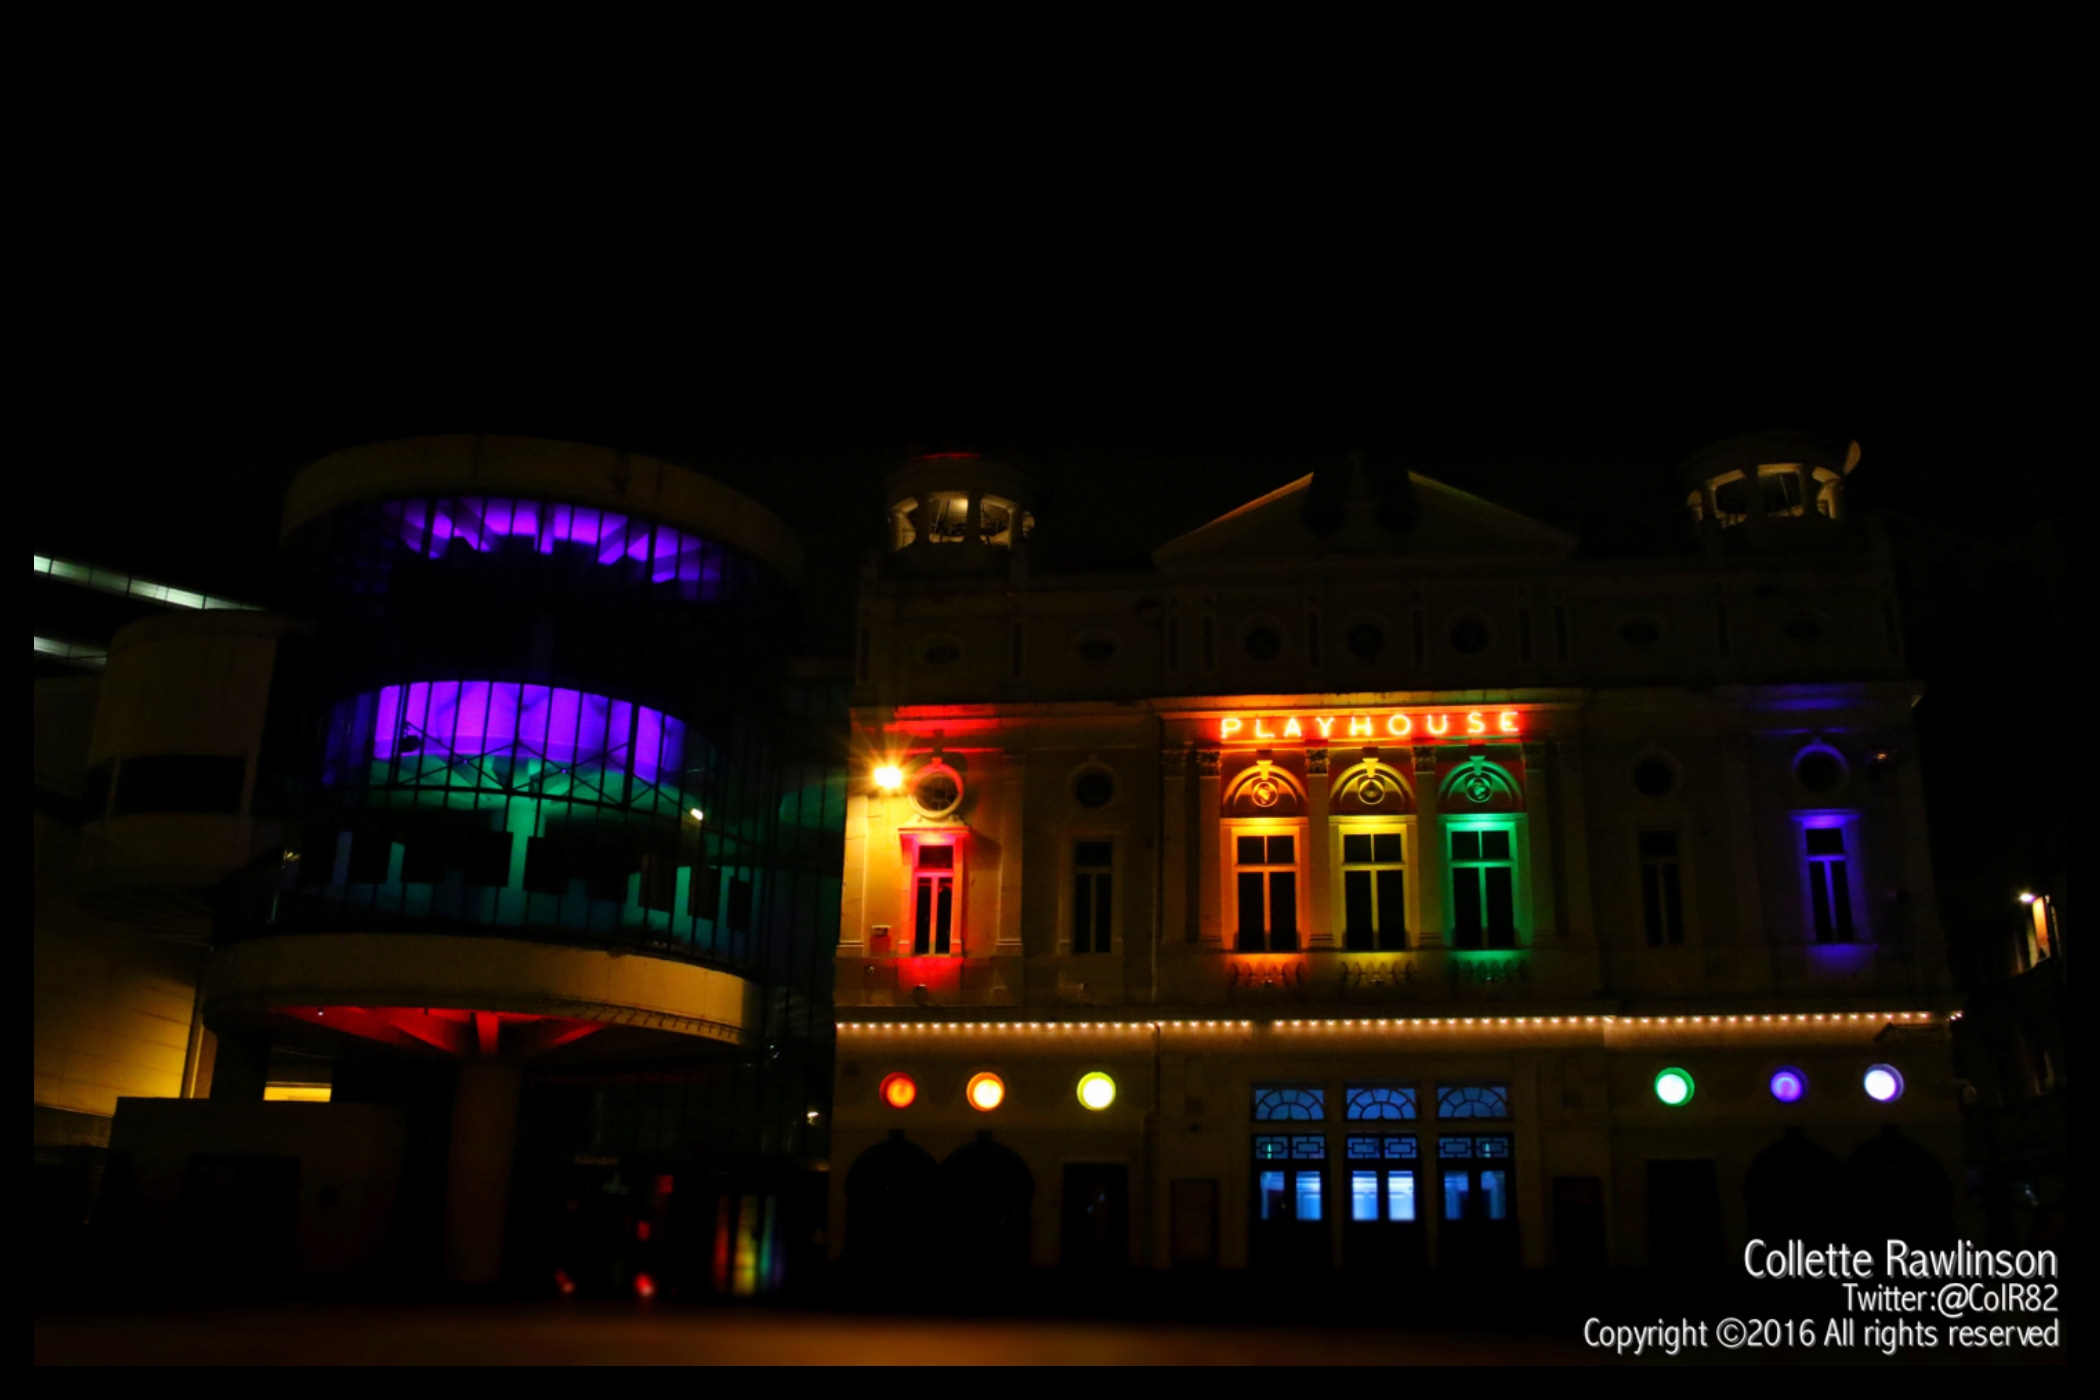 The Playhouse theatre, lit up in rainbow colours for Liverpool Pride 2016